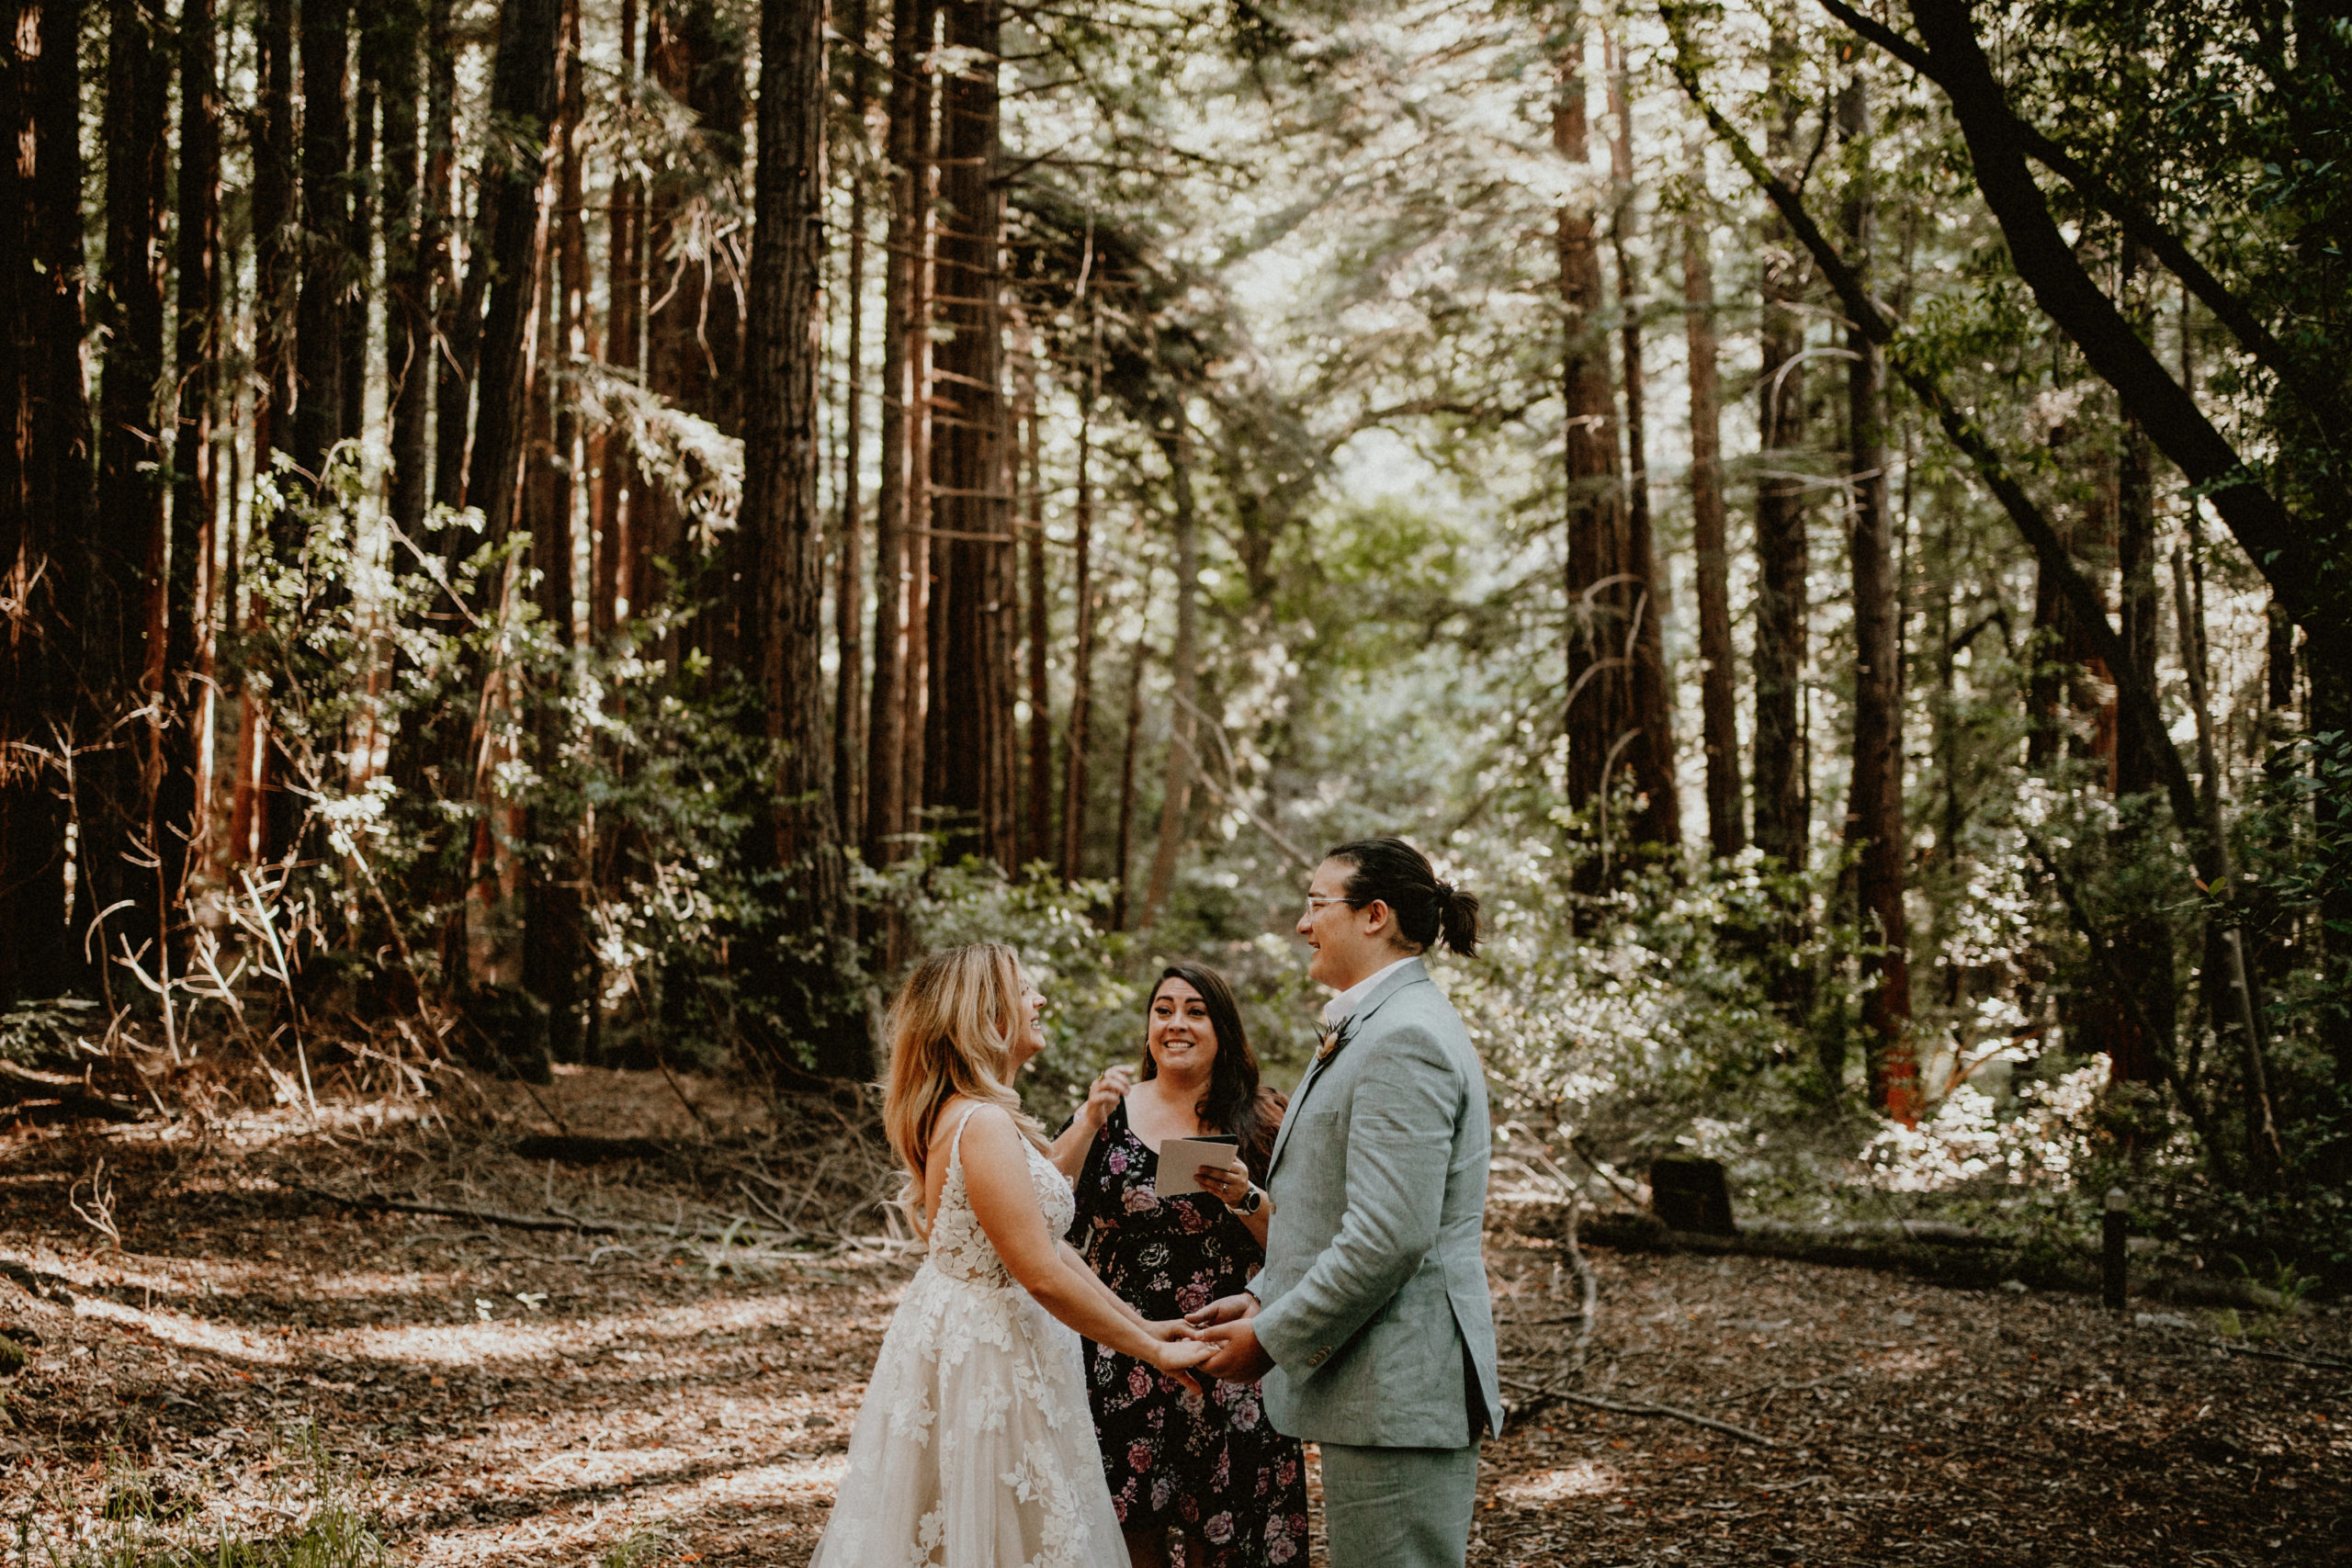 Big Sur elopement package by Let's Get Married by Marie with a couple getting married under the redwood trees